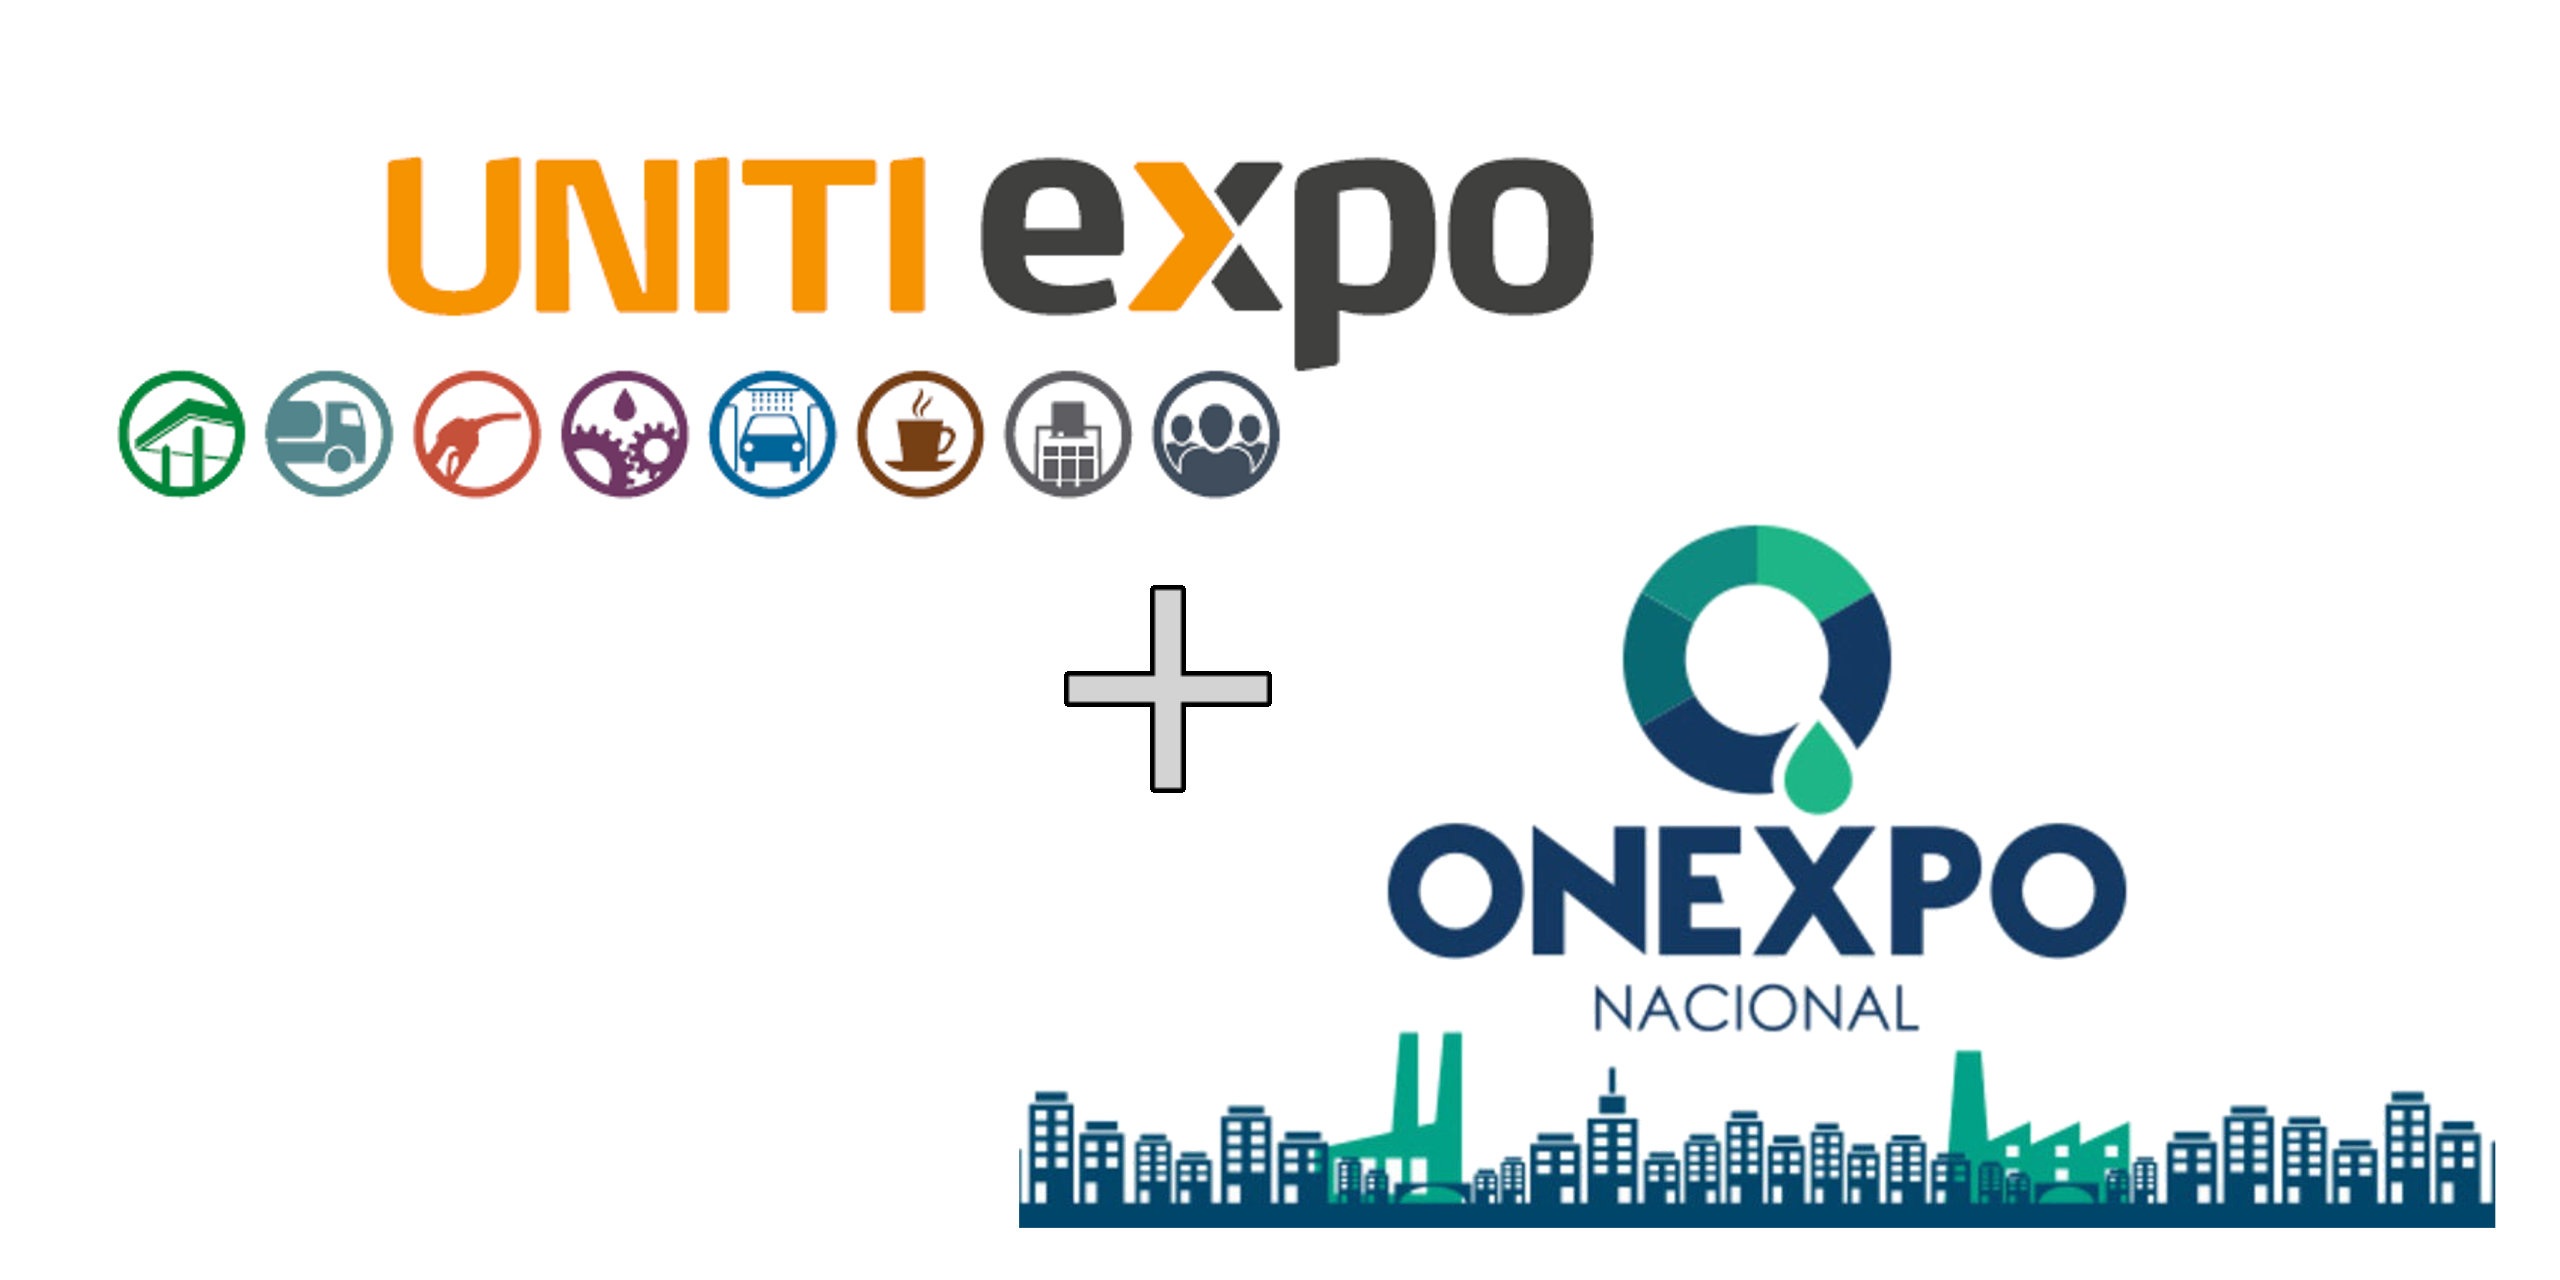 UNITI Expo, a leading European trade fair for the retail petroleum and car wash industries, and Onexpo Nacional, A. C., Mexico’s largest association of fuel retailers, have signed a cooperation agreement to strengthen ties between both entities.